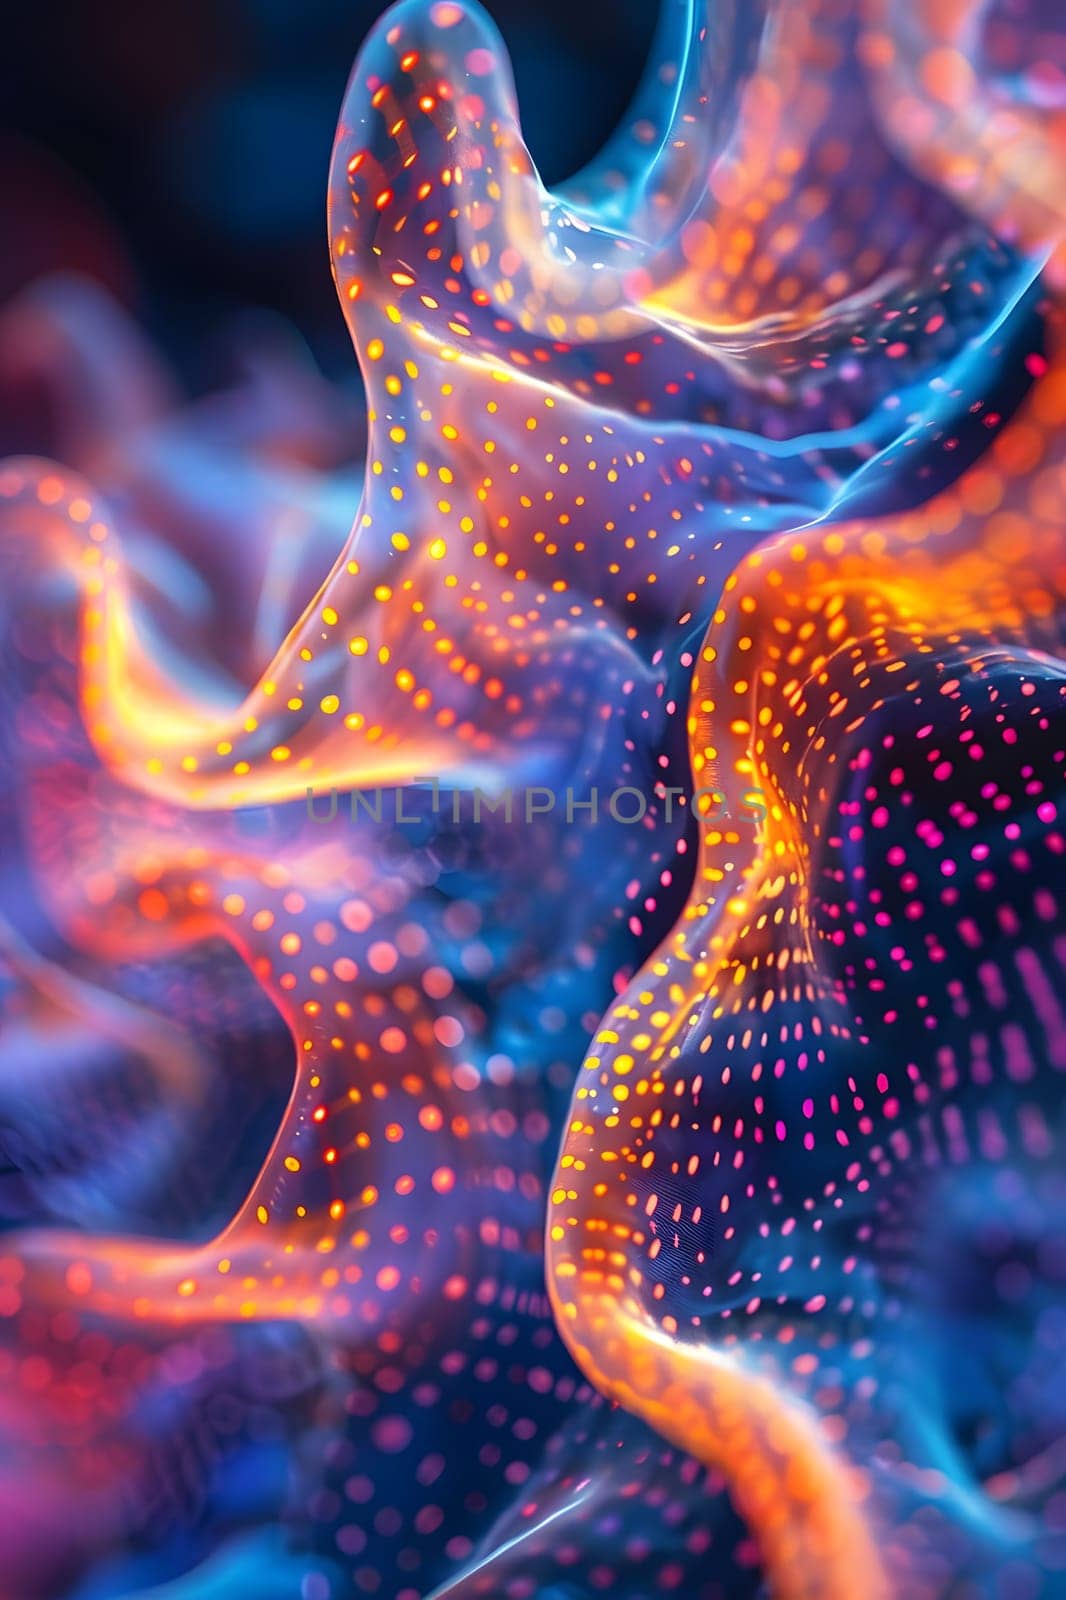 An artistic close up of a vibrant abstract background featuring a colorful pattern of purple, orange, electric blue, and magenta dots and waves resembling a reef or invertebrate underwater